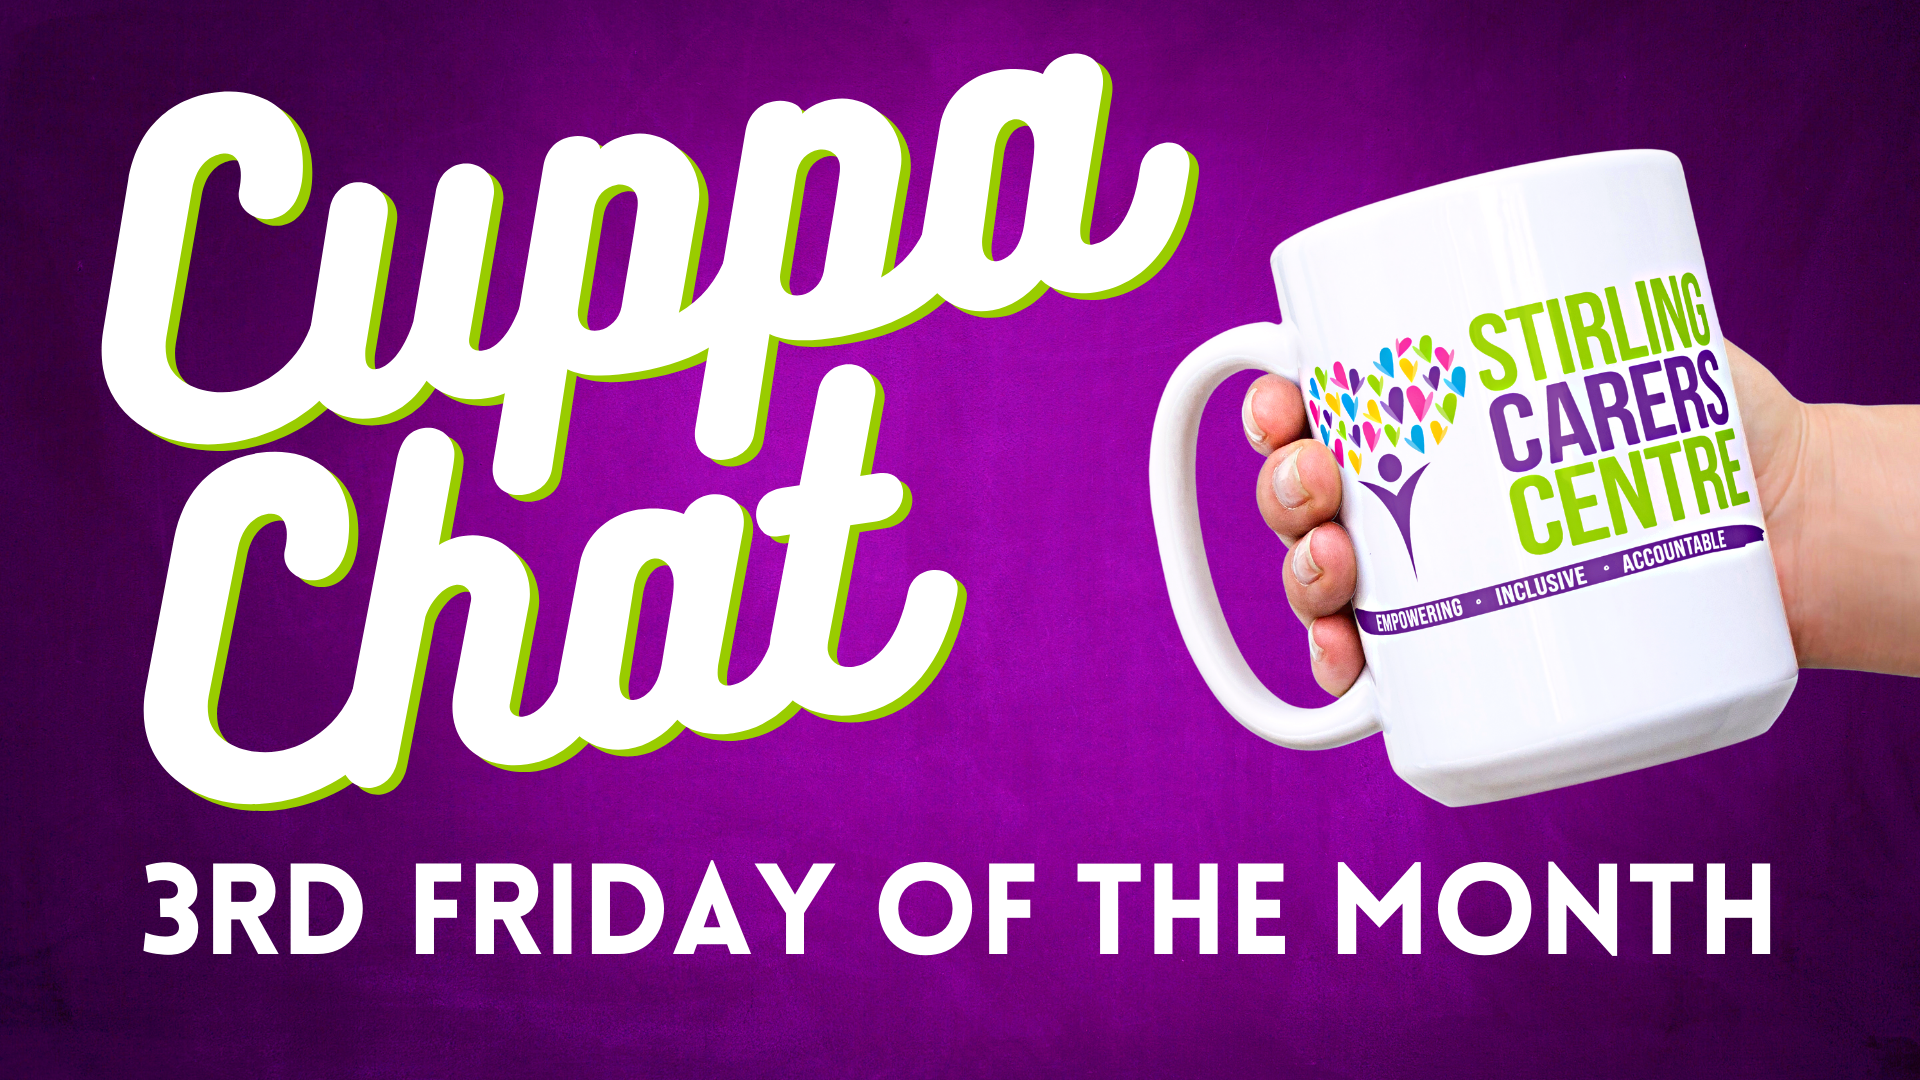 Cuppa Chat advert. Third Friday of the month.